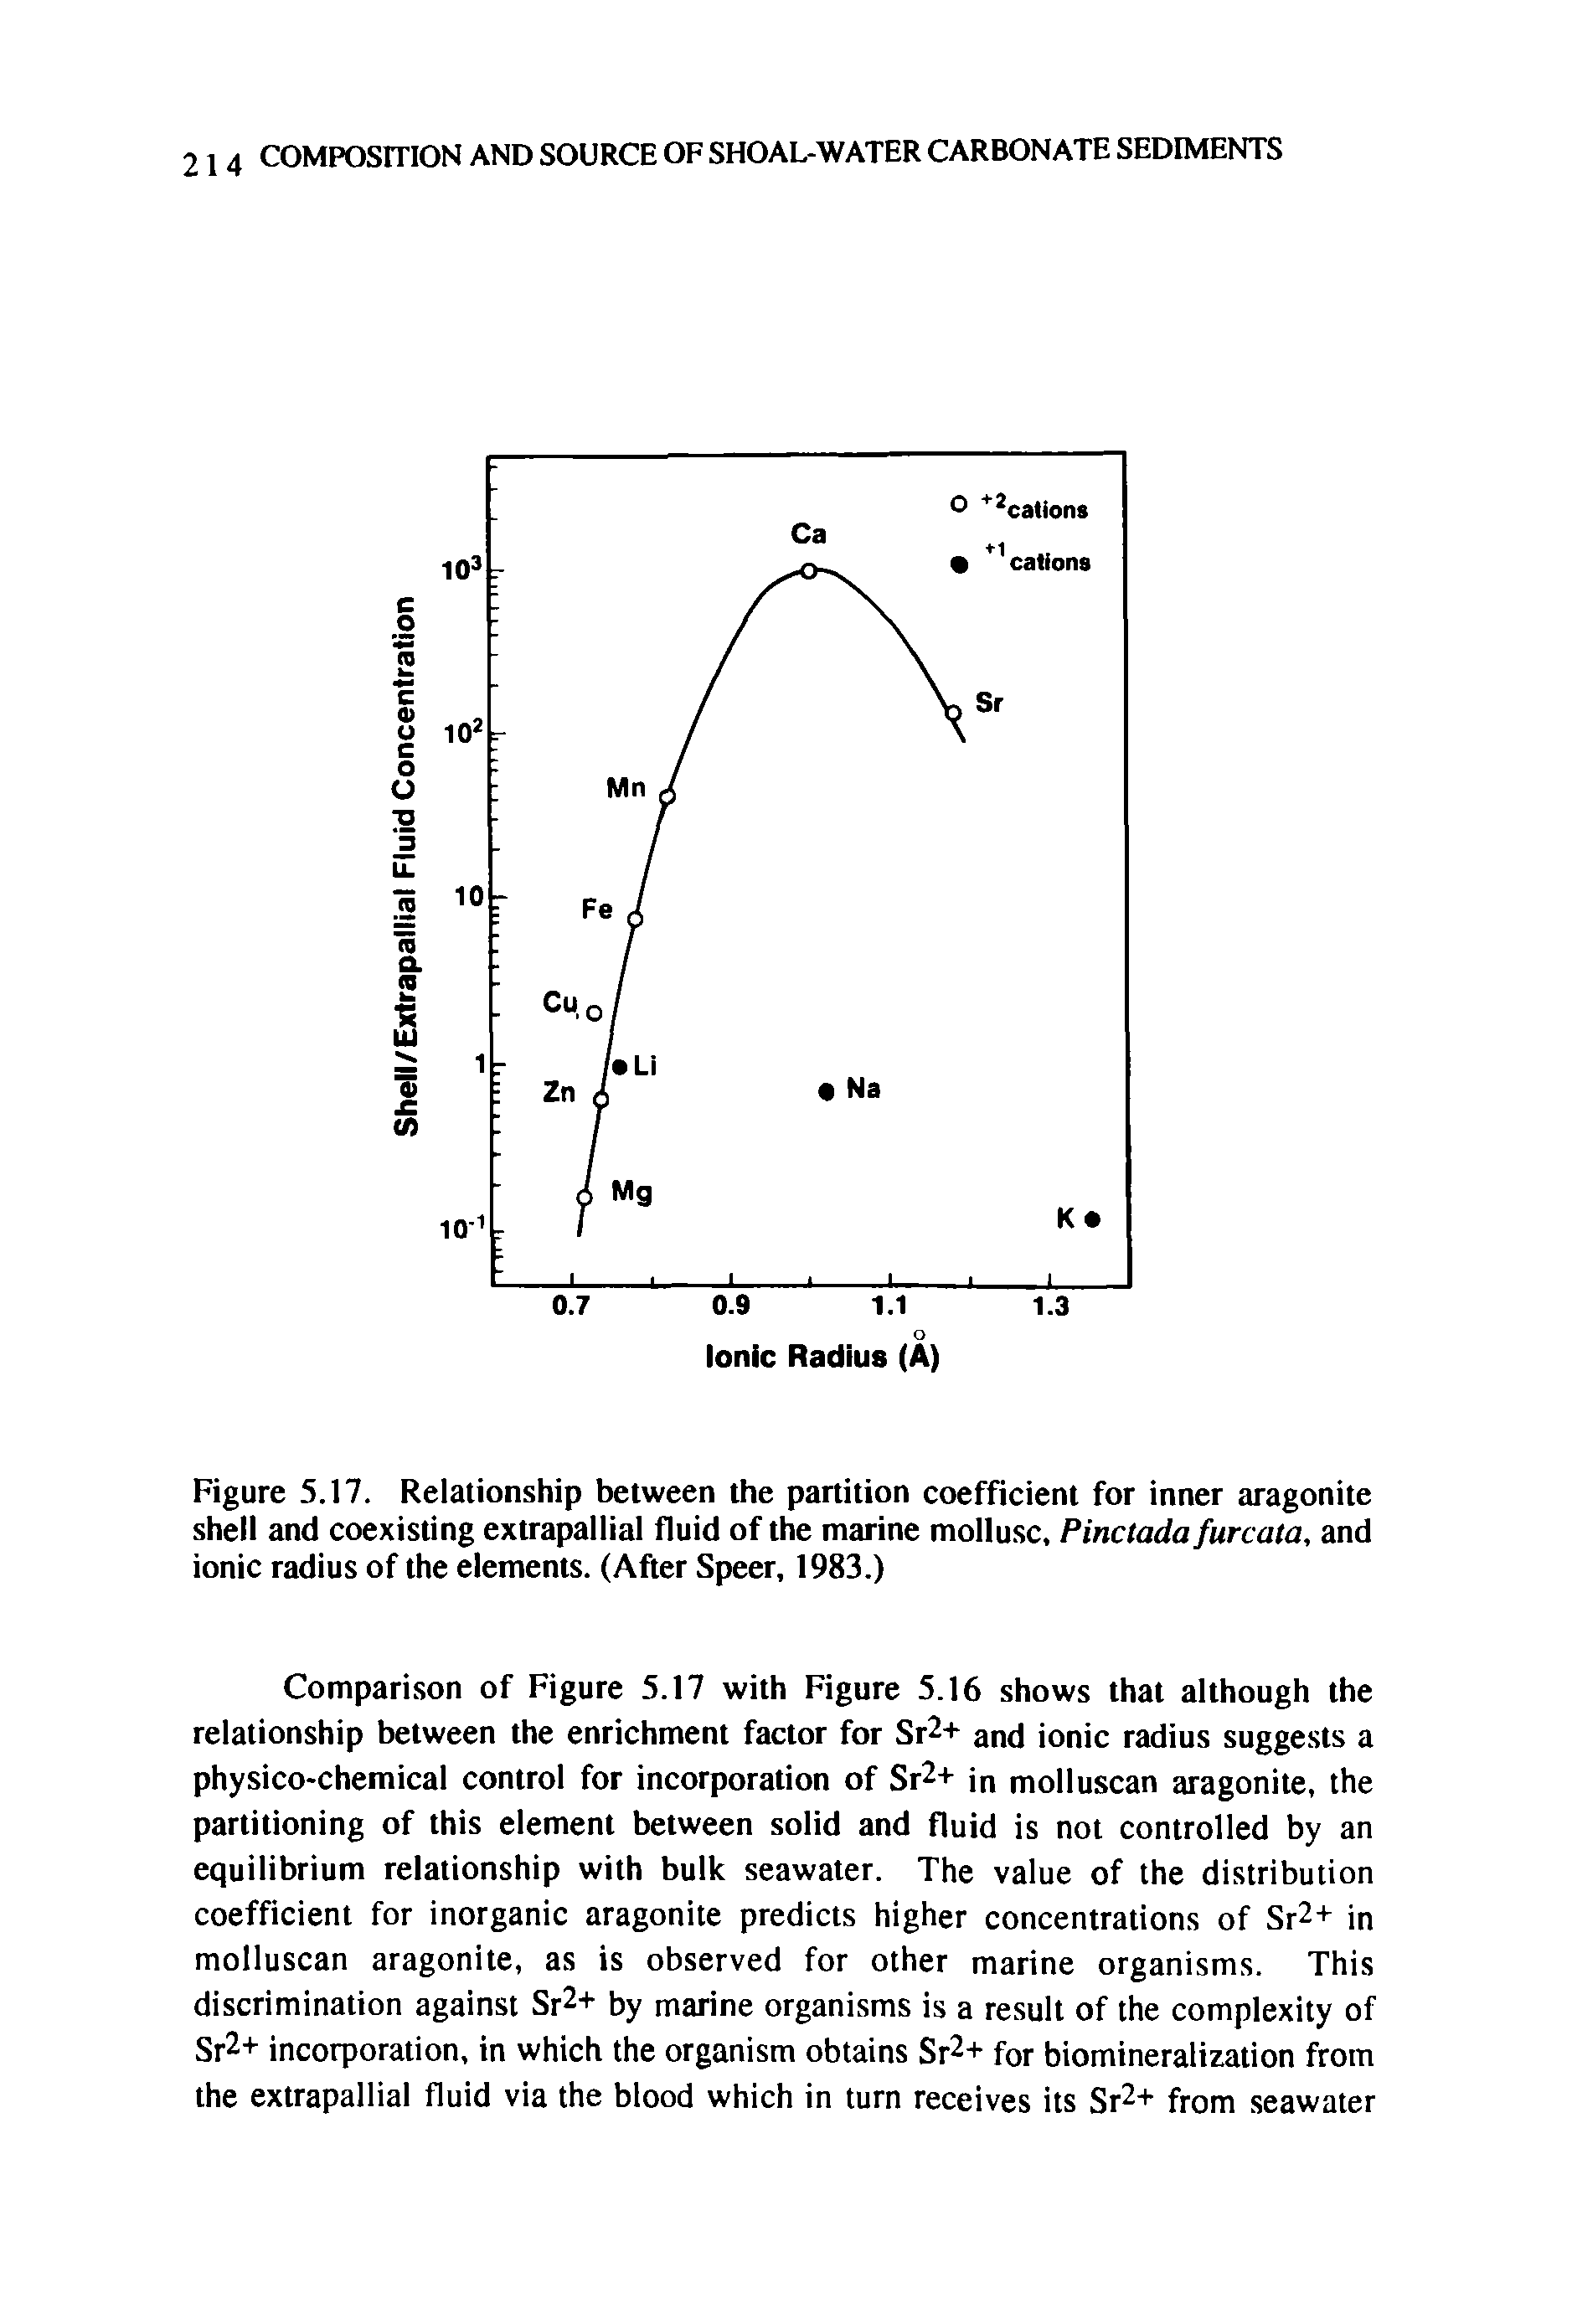 Figure 5.17. Relationship between the partition coefficient for inner aragonite shell and coexisting extrapallial fluid of the marine mollusc, Pinctada furcata, and ionic radius of the elements. (After Speer, 1983.)...